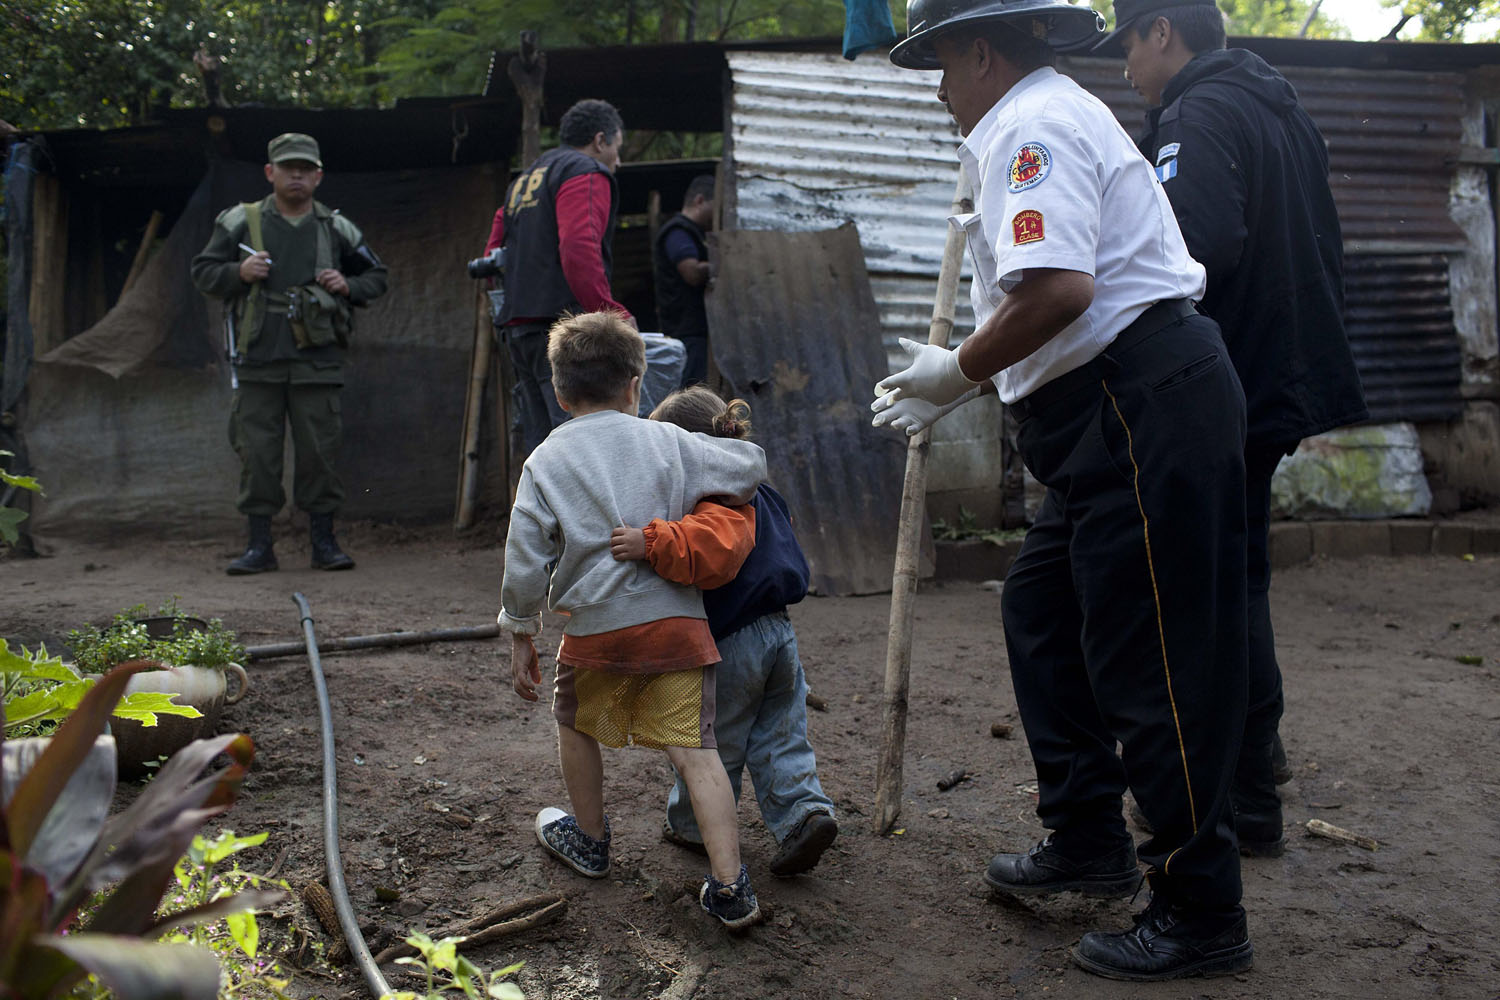 Oct. 9, 2012. Carlos Daniel Gonzalez (L), 6, holds his sister Izabel, 4, as they are accompanied by authorities after unknown gunmen killed their parents and other relatives in the municipality of Villa Canales, 22 kilometers from Guatemala City.